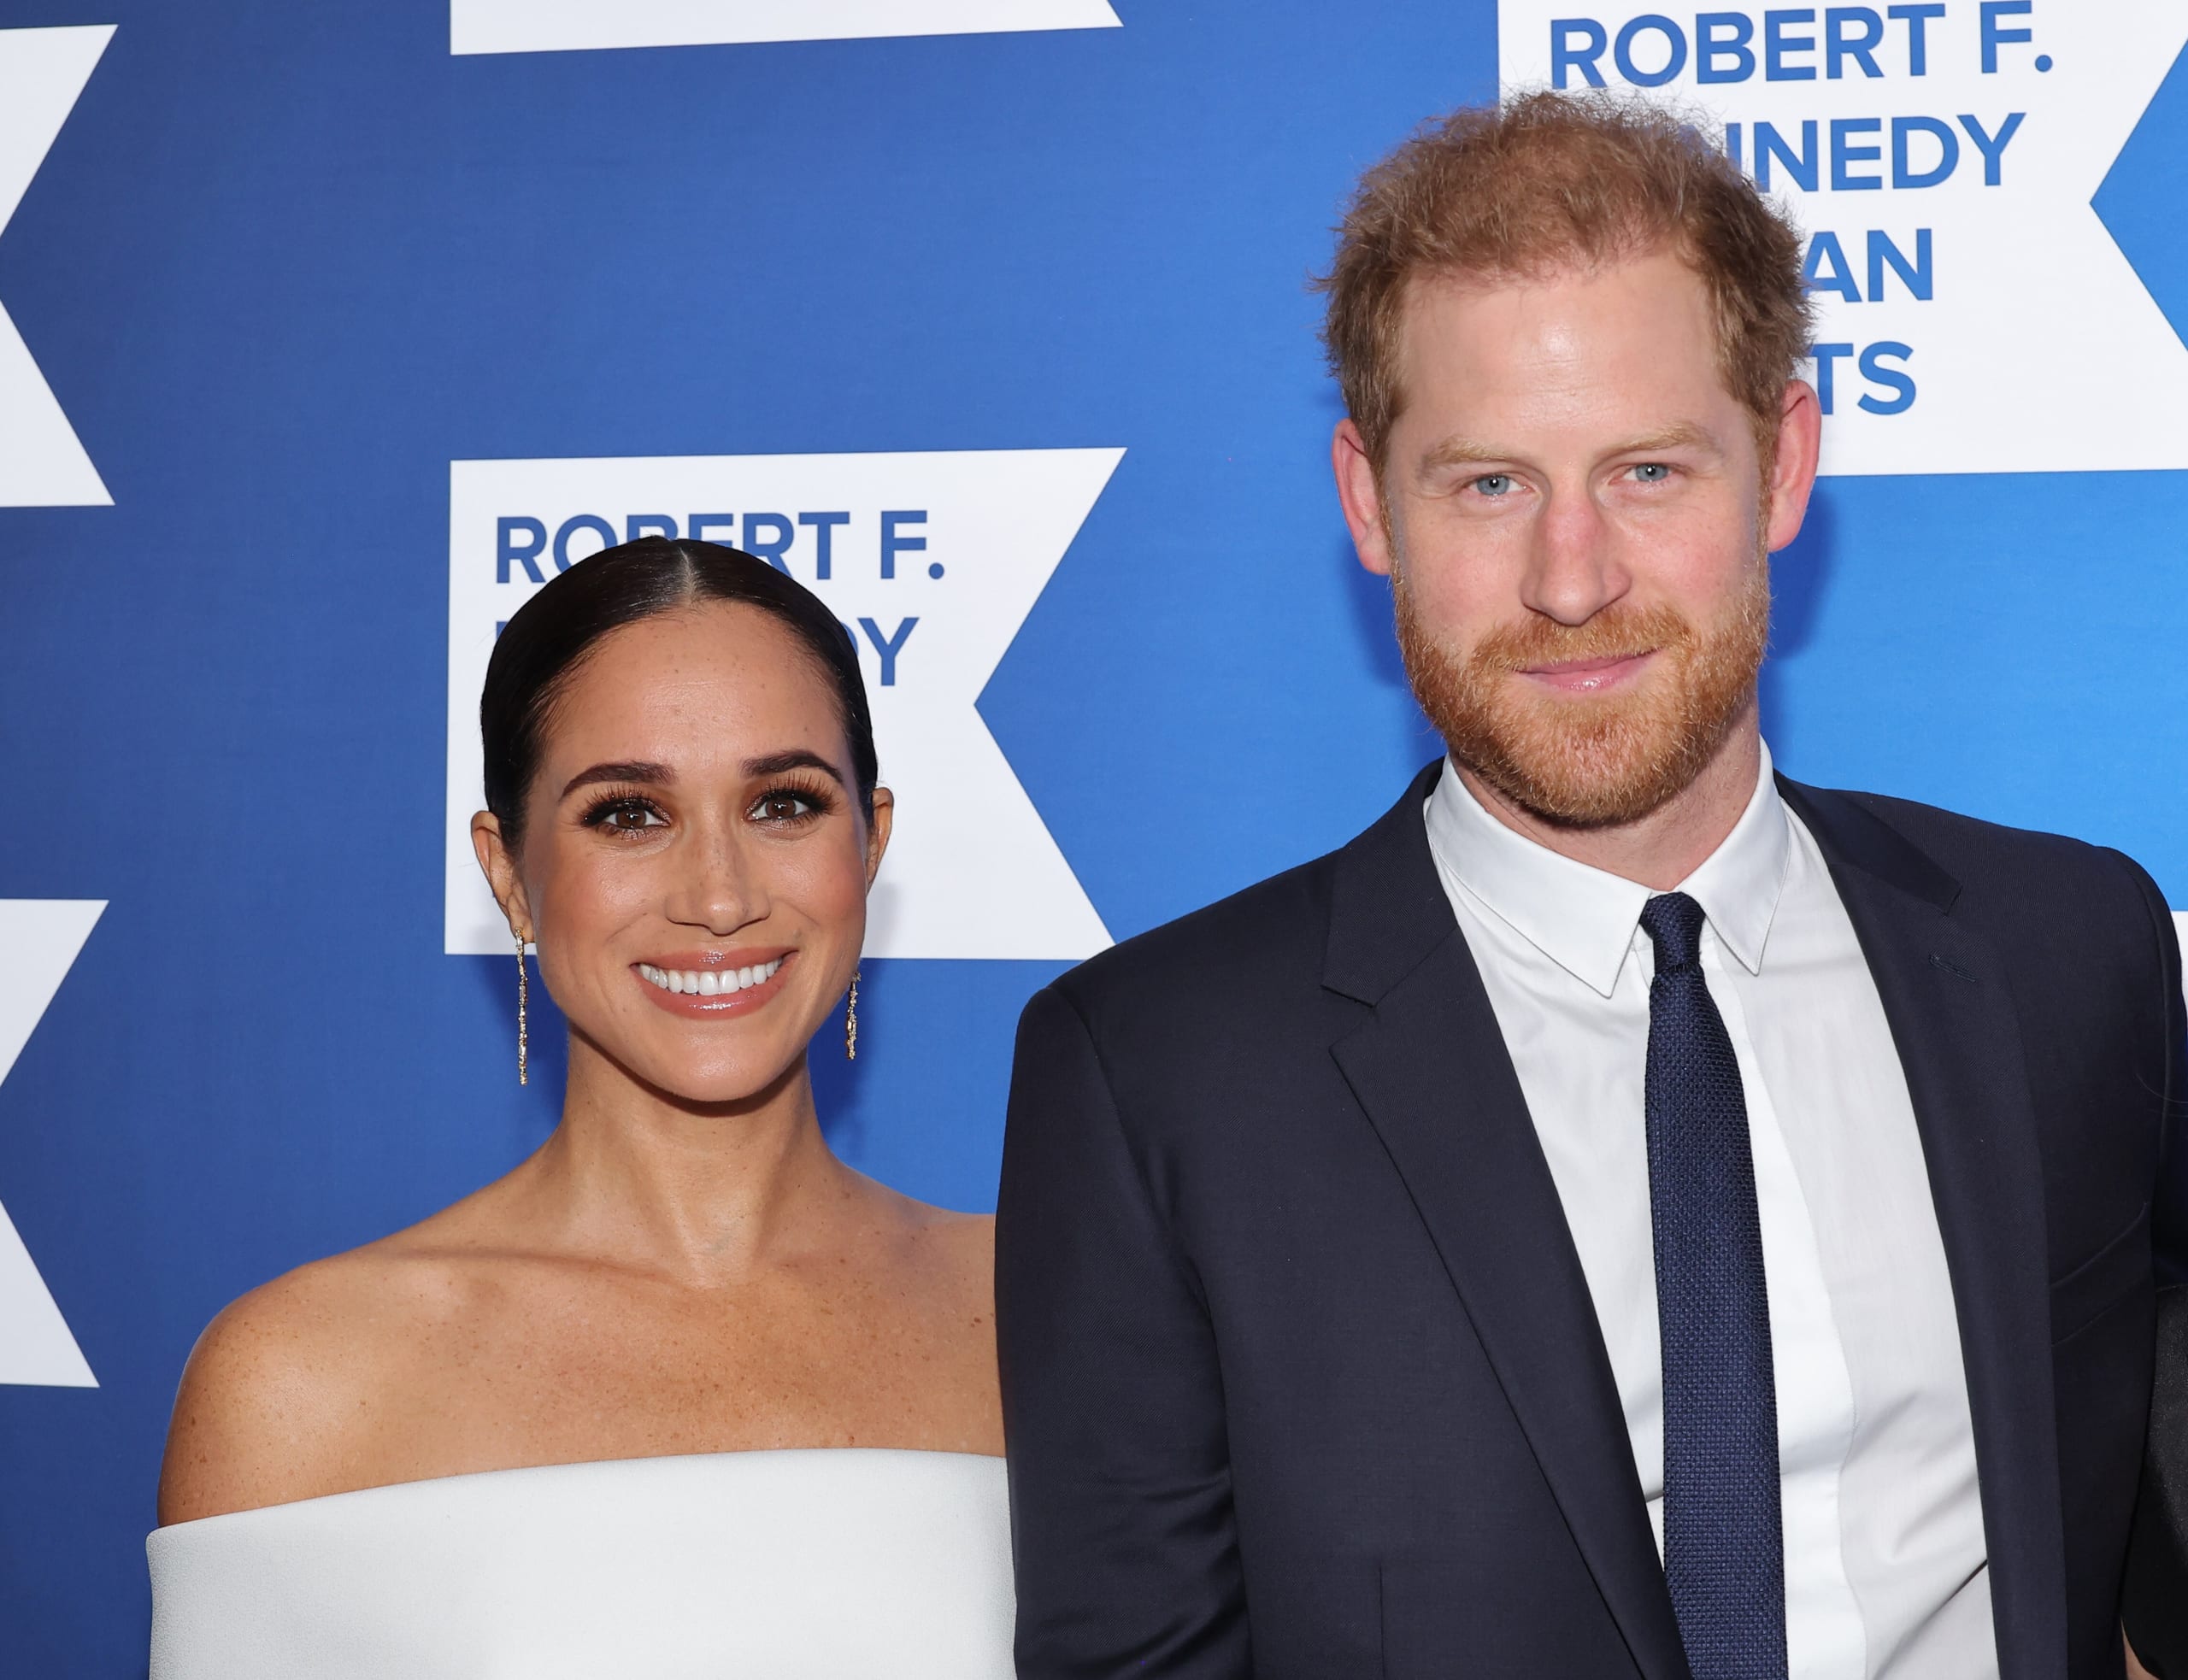 Meghan Markle, Prince Harry release their foundation’s ‘Impact Report’